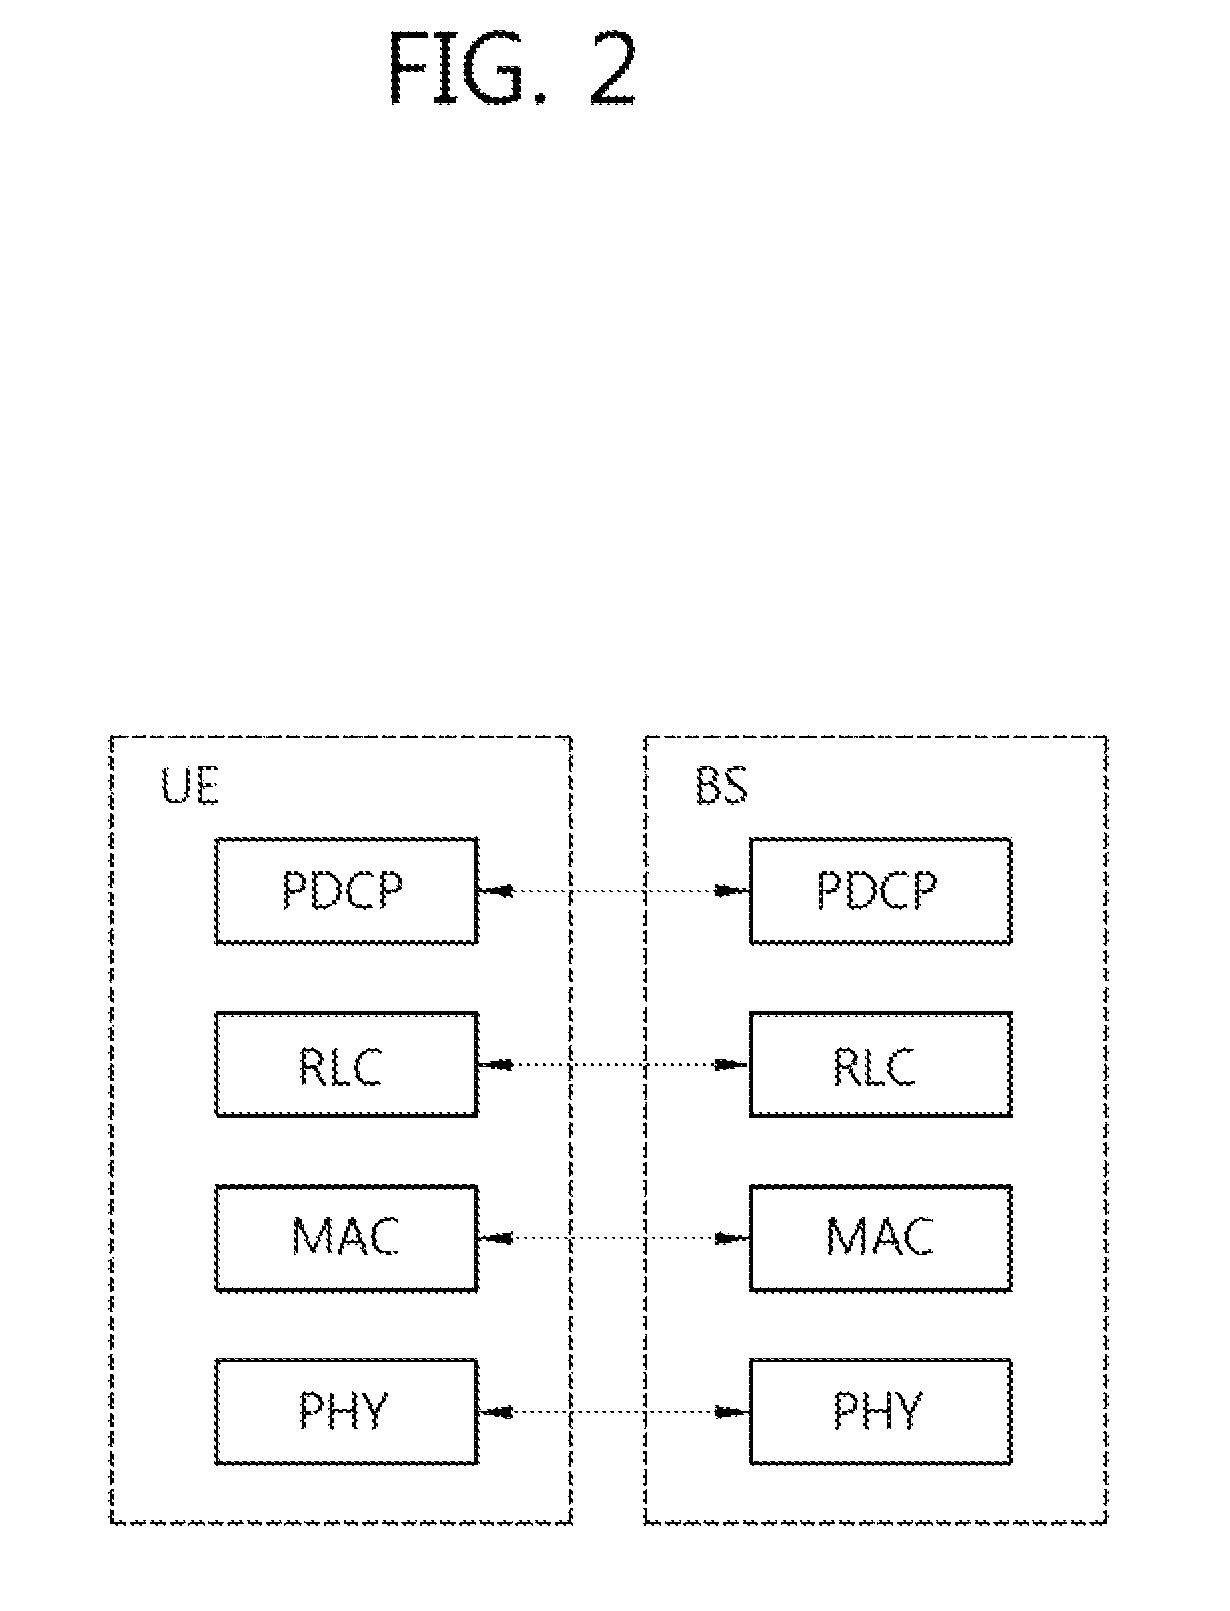 Method and apparatus for performing logged measurement in a wireless communication system